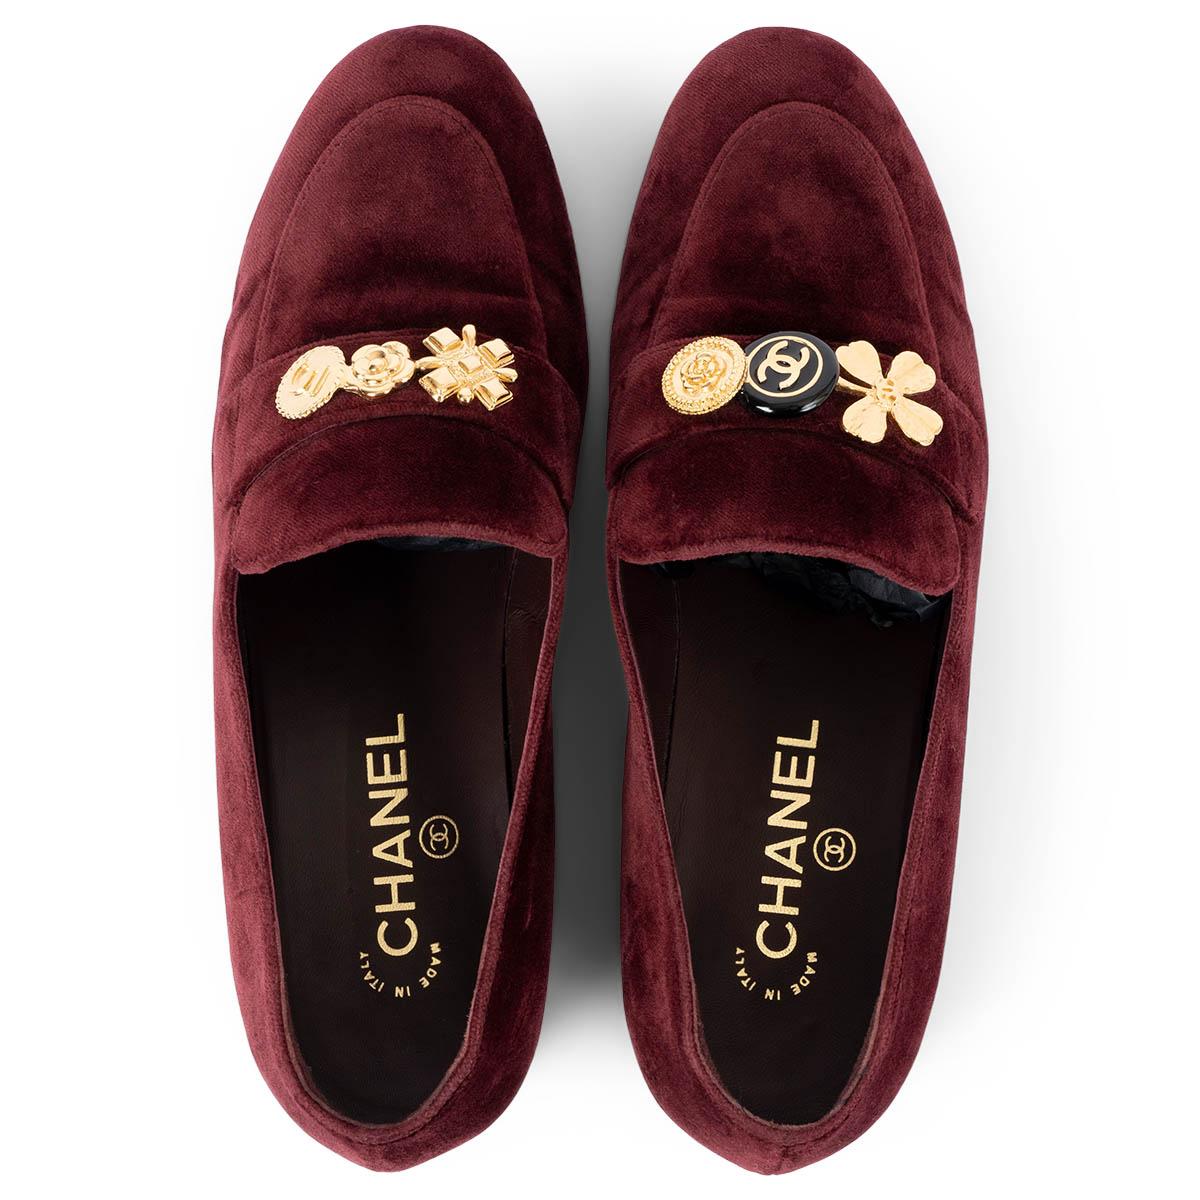 CHANEL burgundy velvet 2019 19B LUCKY CHARM Loafers Shoes 39 fit 38.5 2